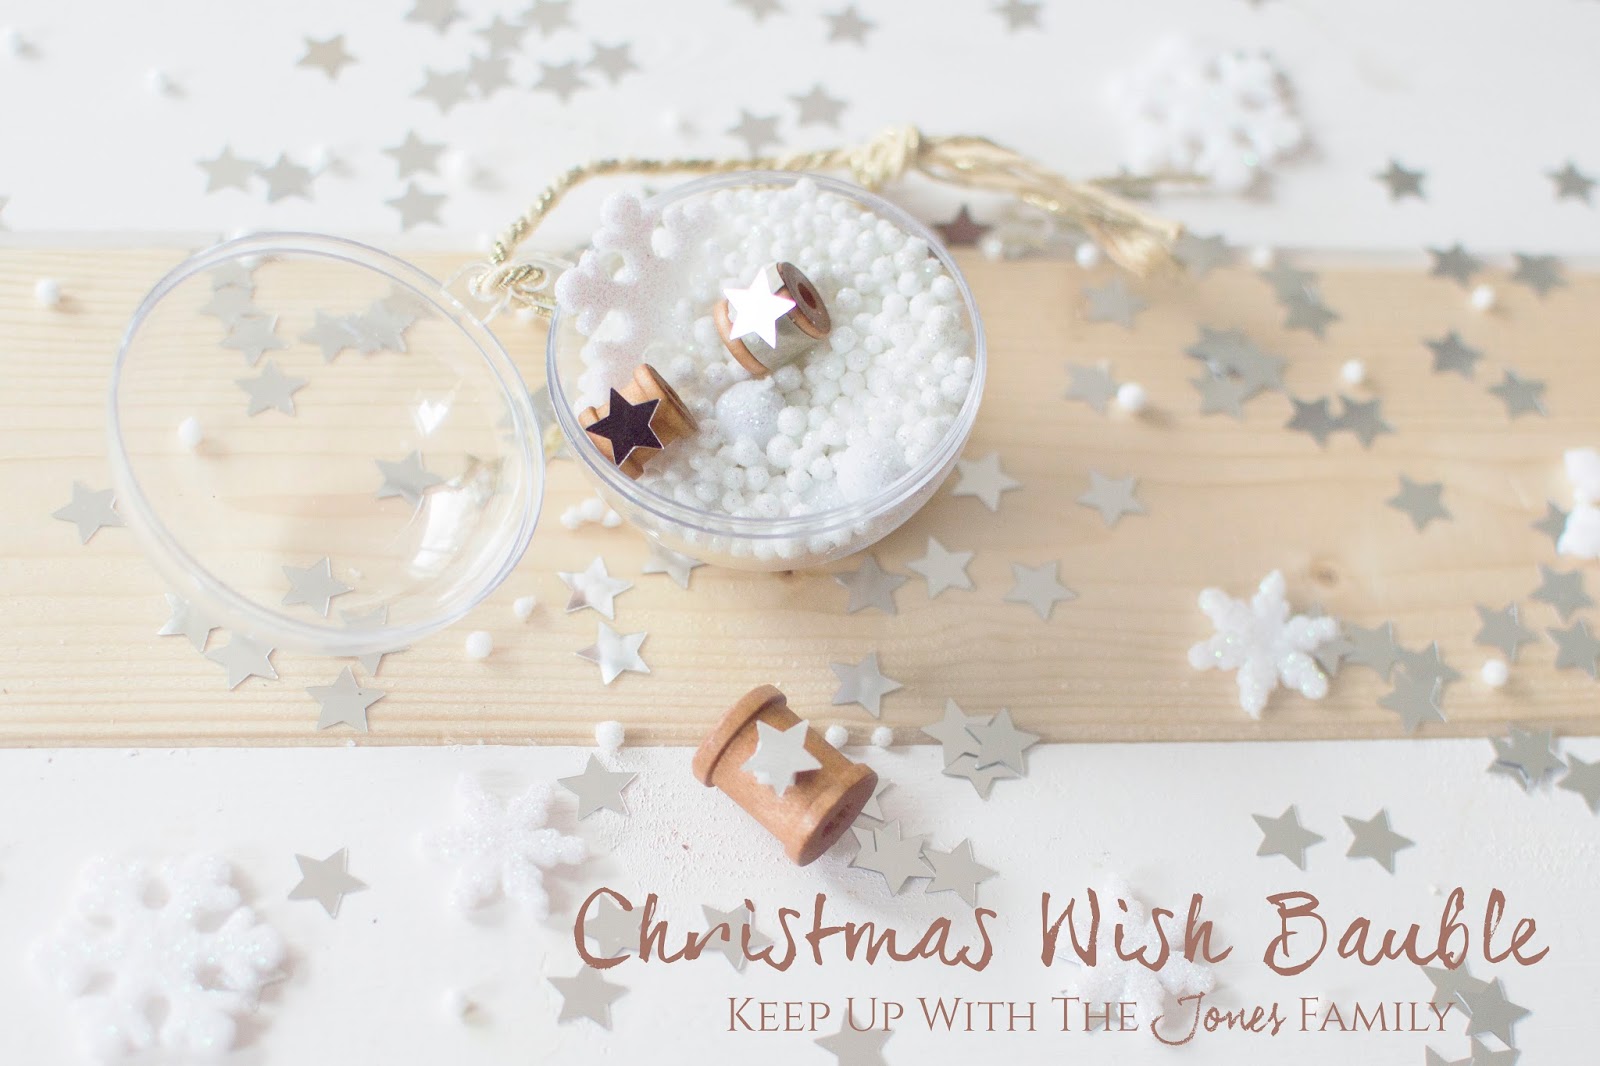 CHRISTMAS WISH BAUBLES